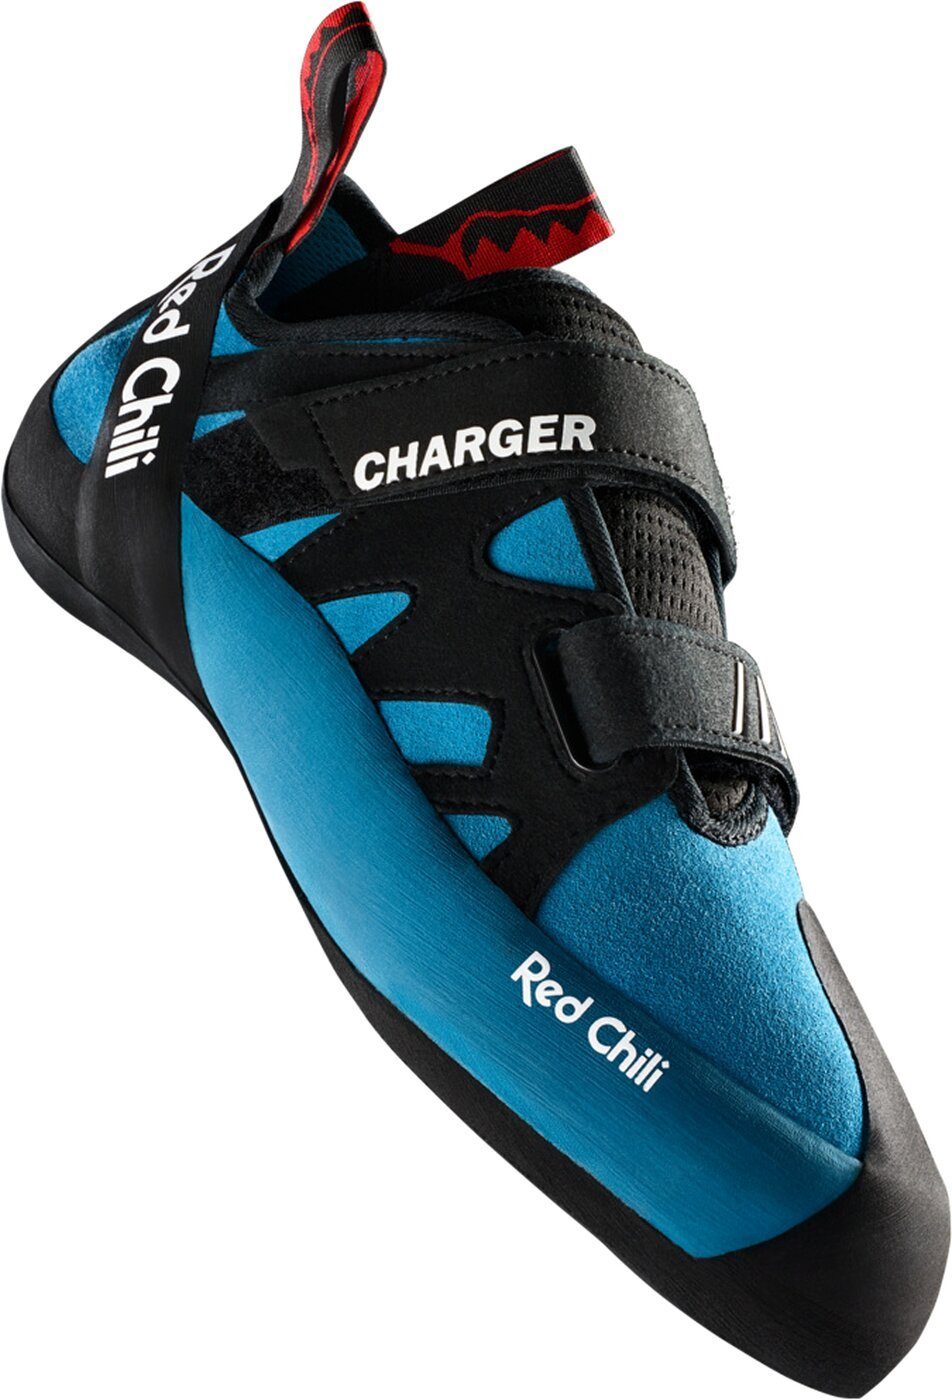 INKBLUE Charger Kletterschuh Chili Red